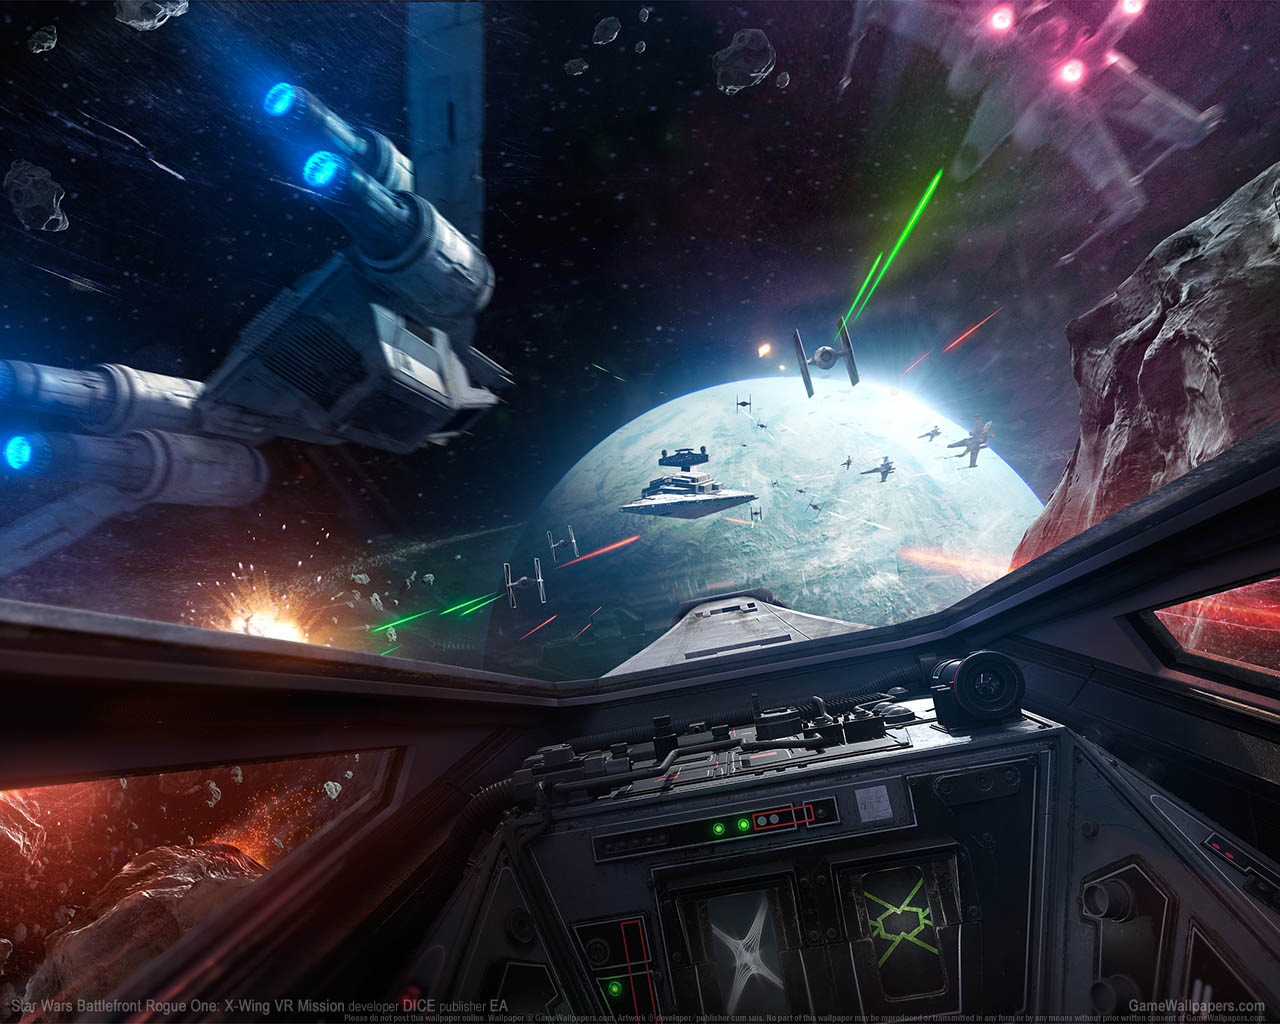 Star Wars Battlefront Rogue One: X-Wing VR Mission wallpaper 01 1280x1024